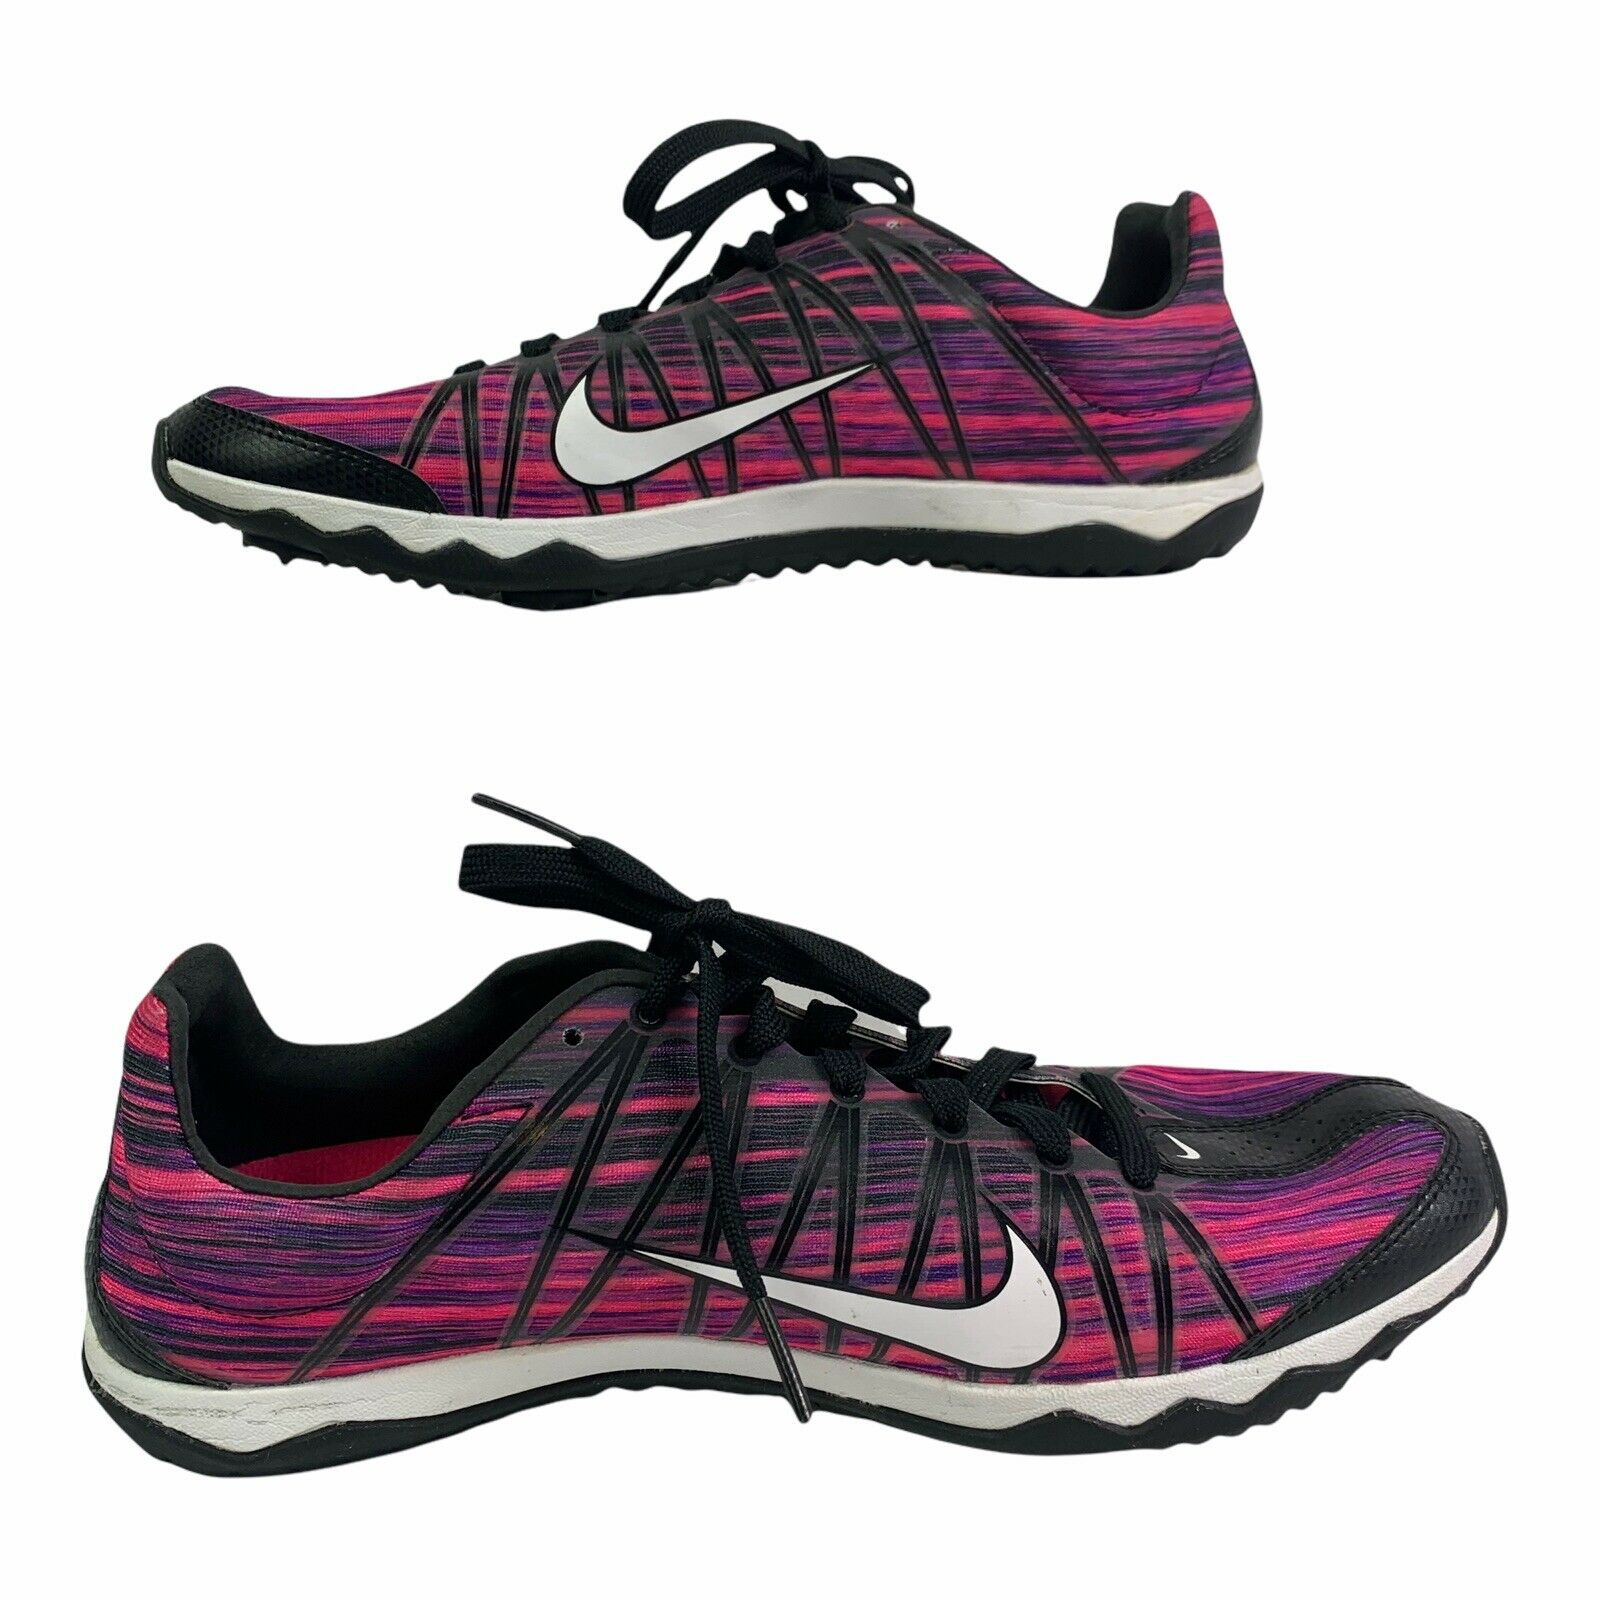 Nike Cross Country Track Field Spike Shoes Rival Xc Pink Black Women Us 8.5 2014